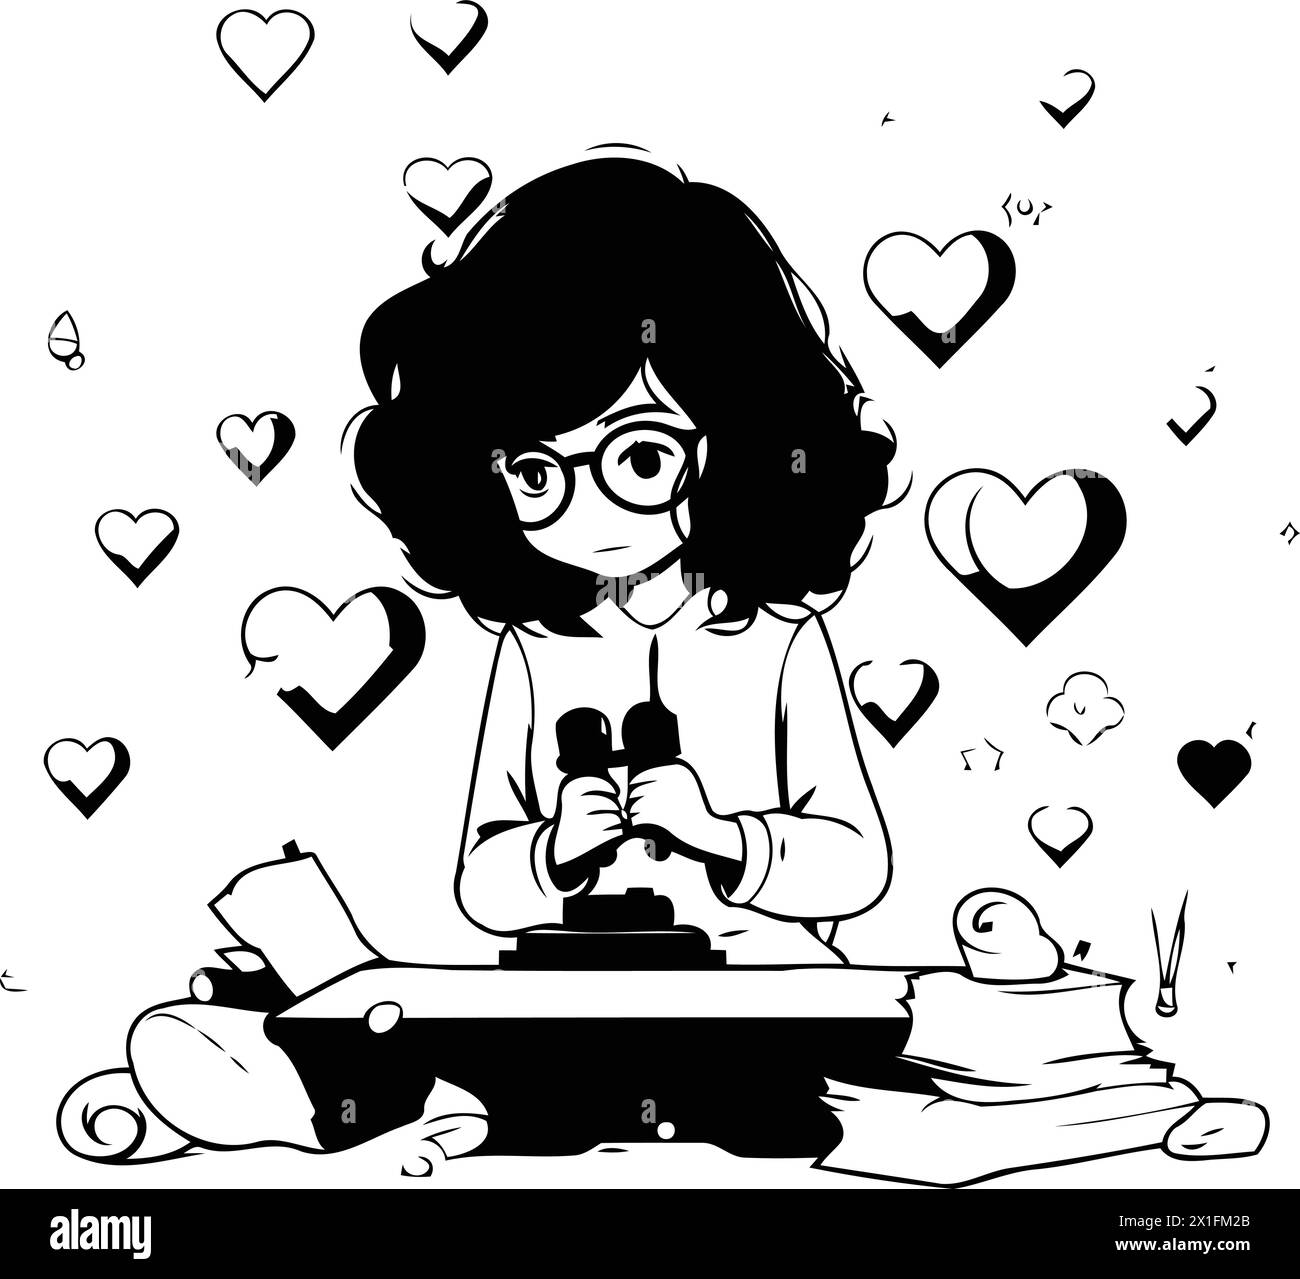 Vector illustration of a girl with glasses playing the old typewriter. Stock Vector